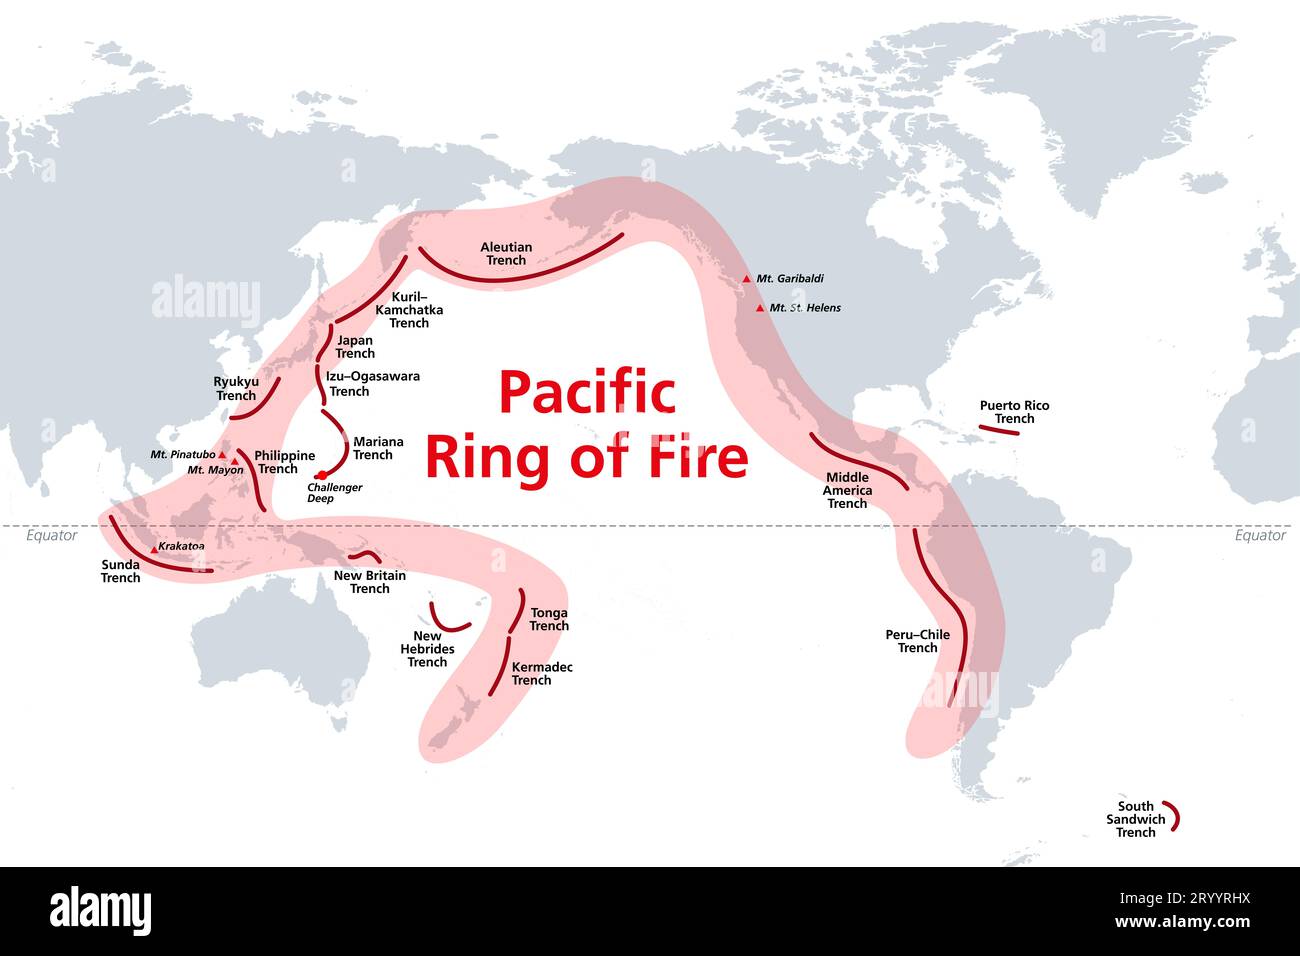 File:Pacific Ring of Fire volcanoes.png - Wikipedia